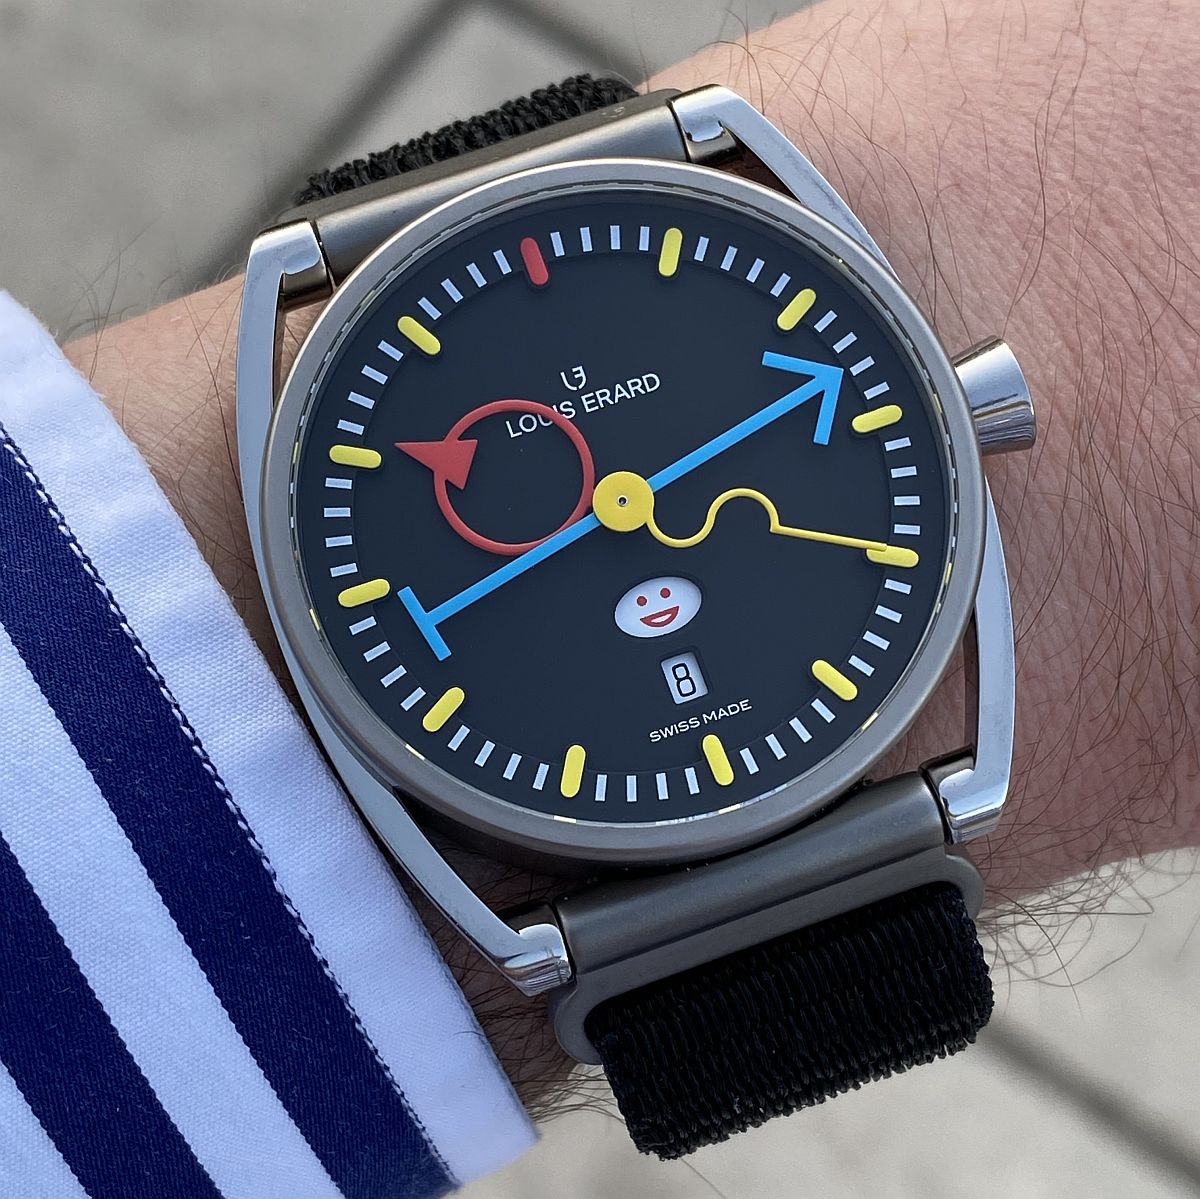 Horological Meandering - Hands-on with another lesser known world